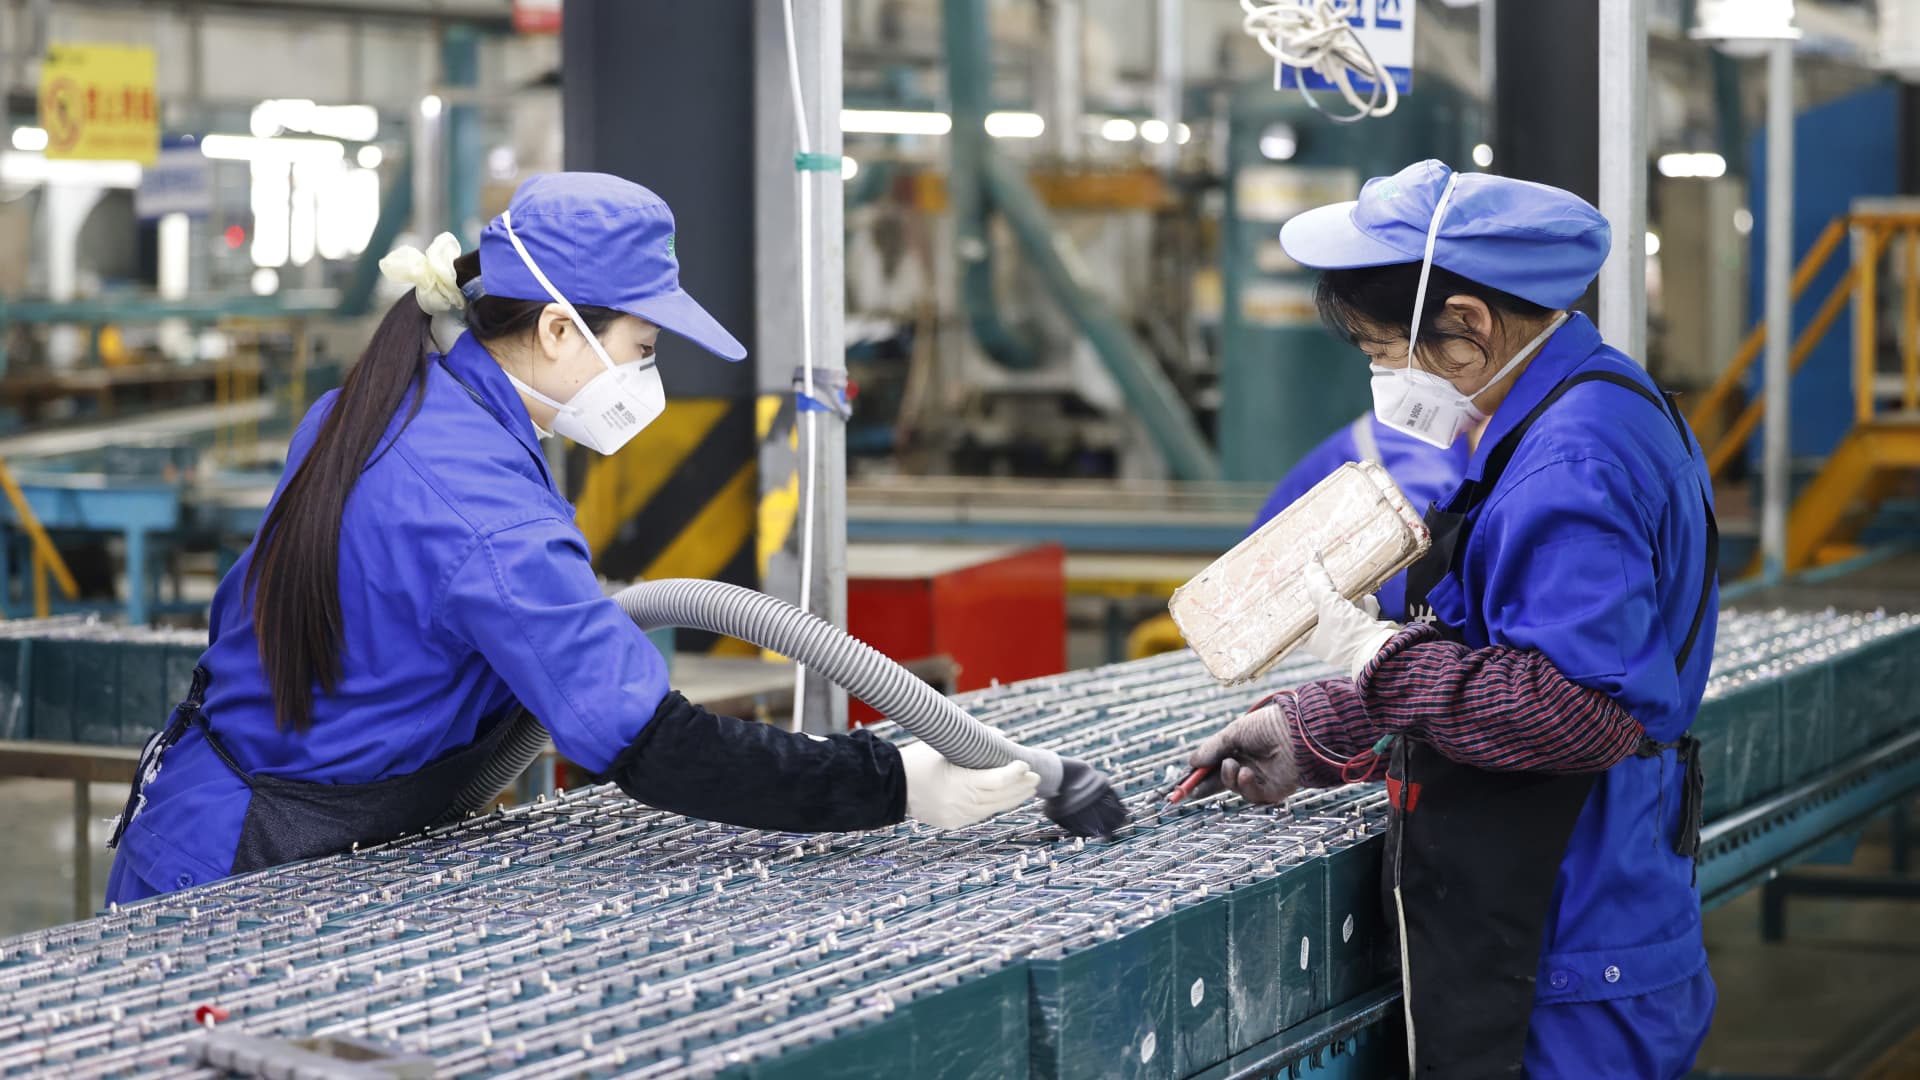 China’s economy is on track for ‘strong’ March performance, survey says